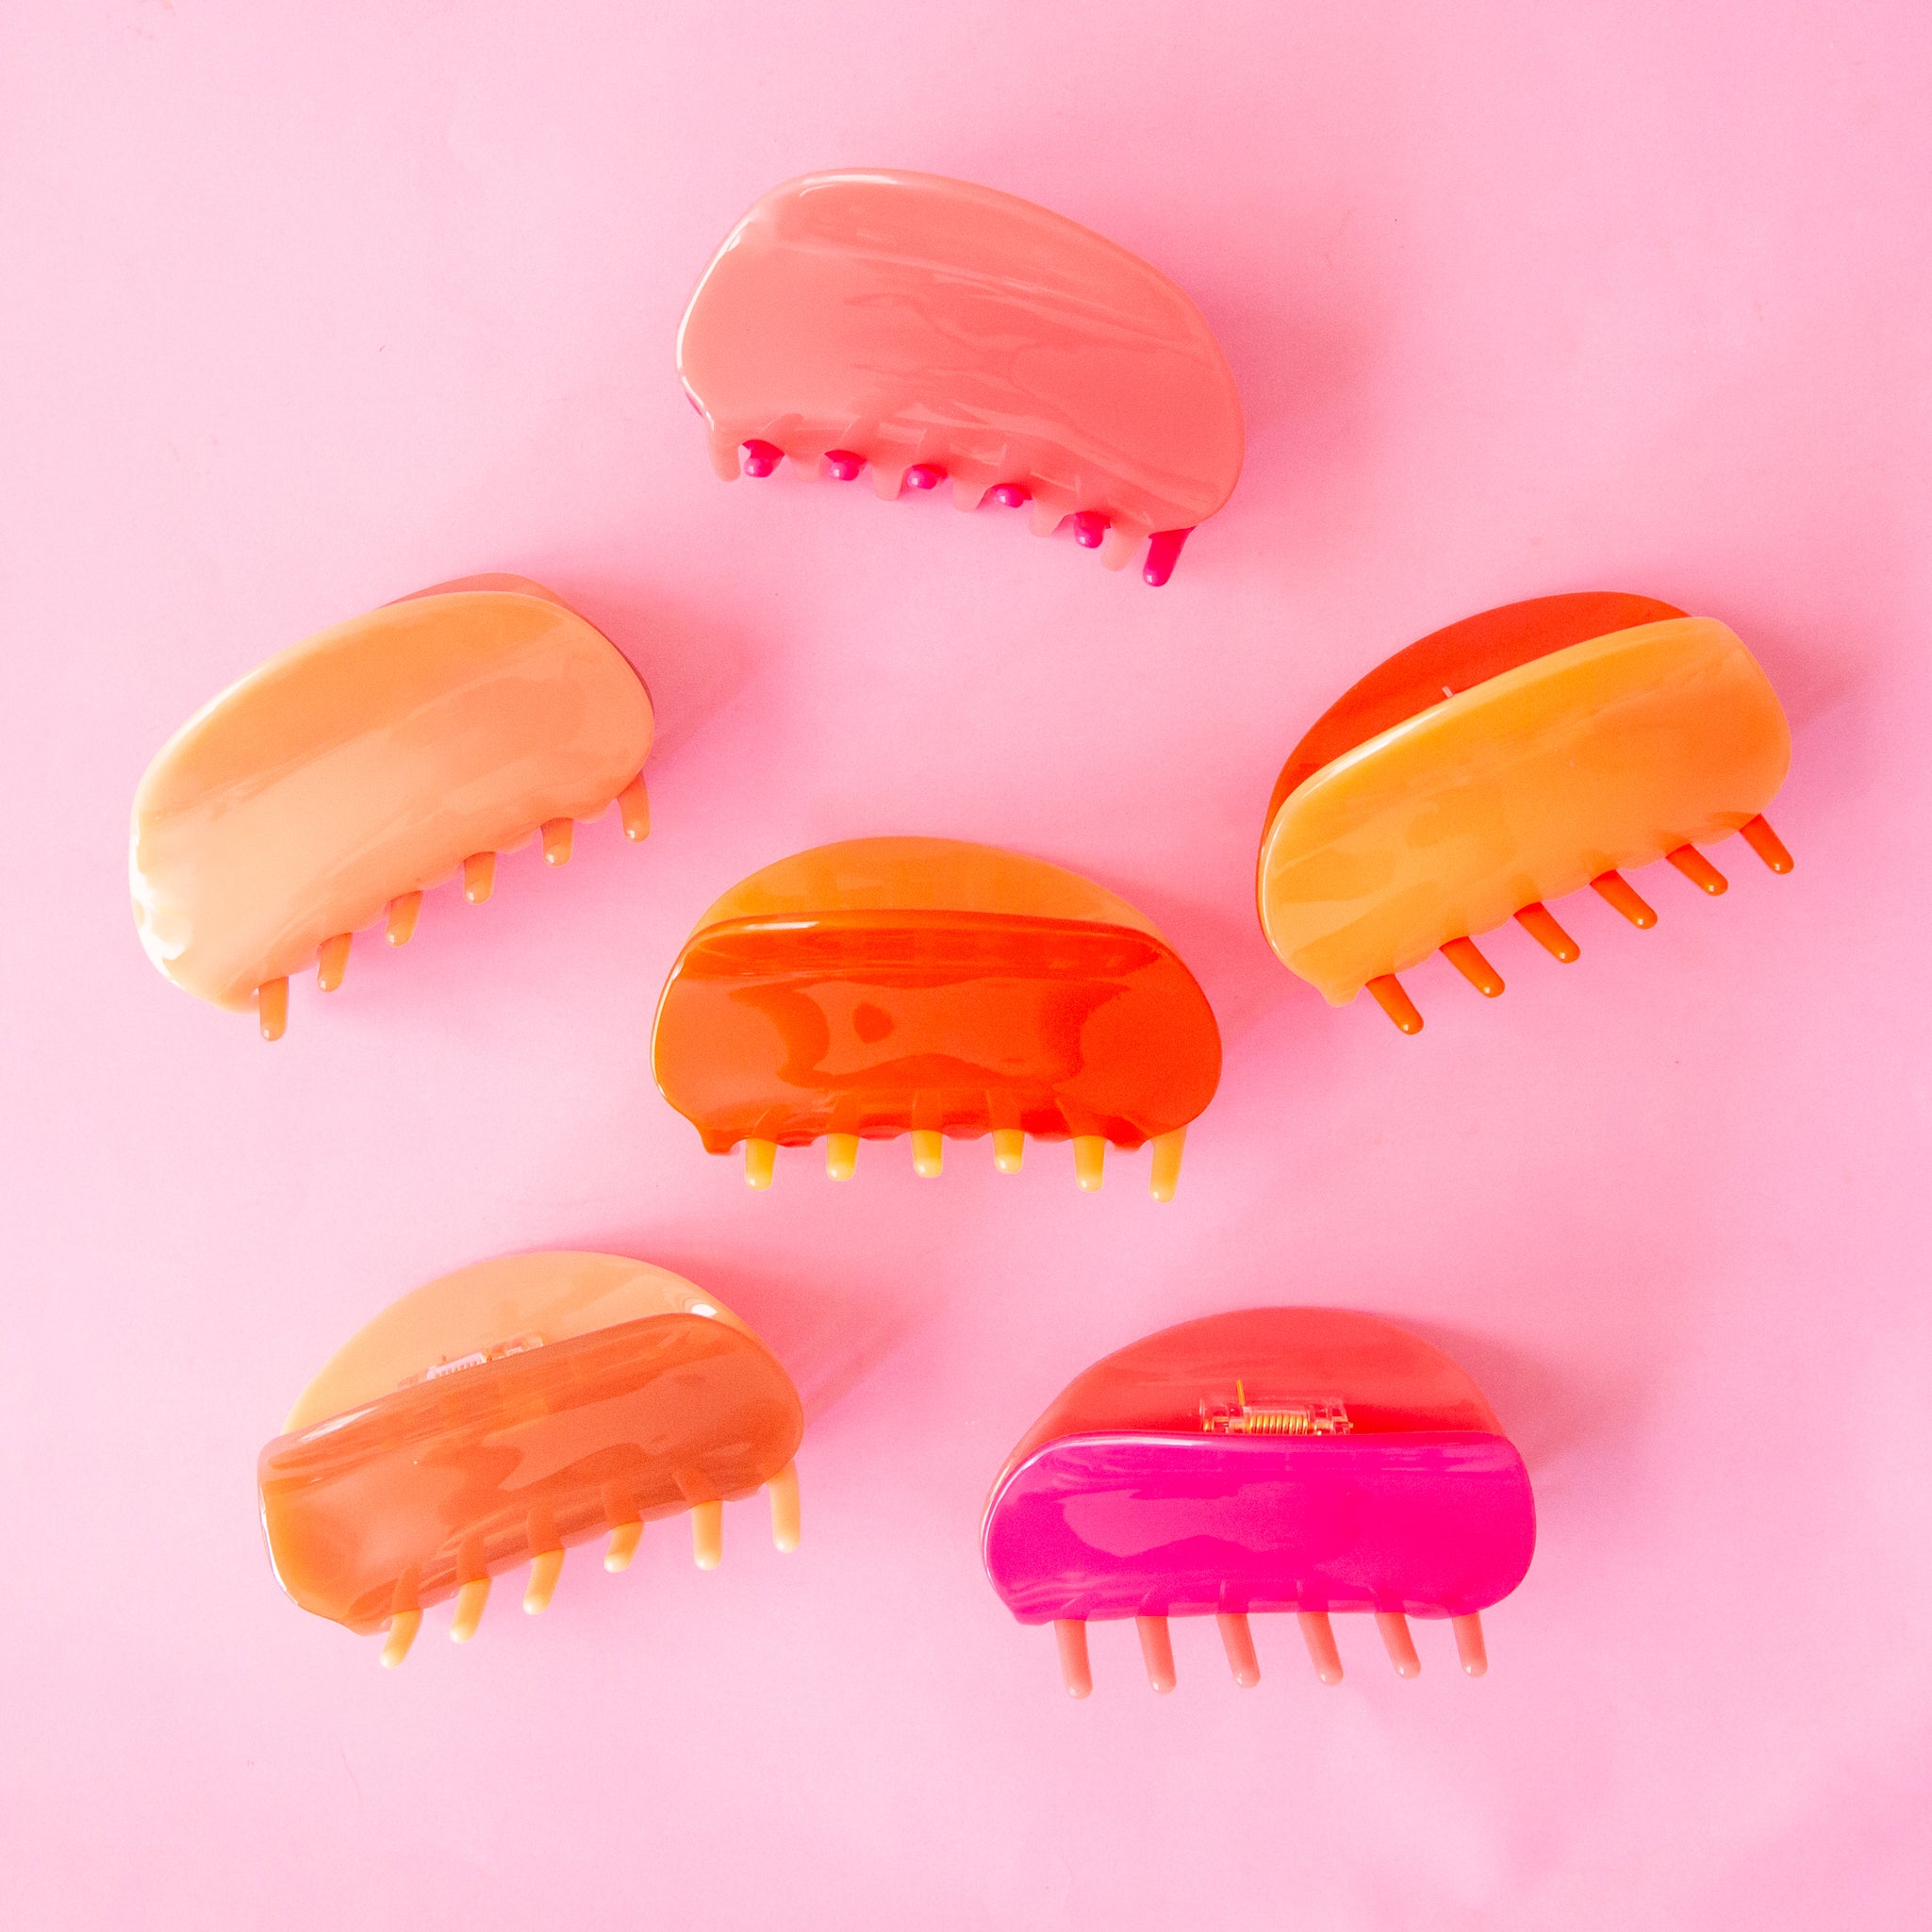 All three of our two-toned claw clips side by side in tones of pink and orange.